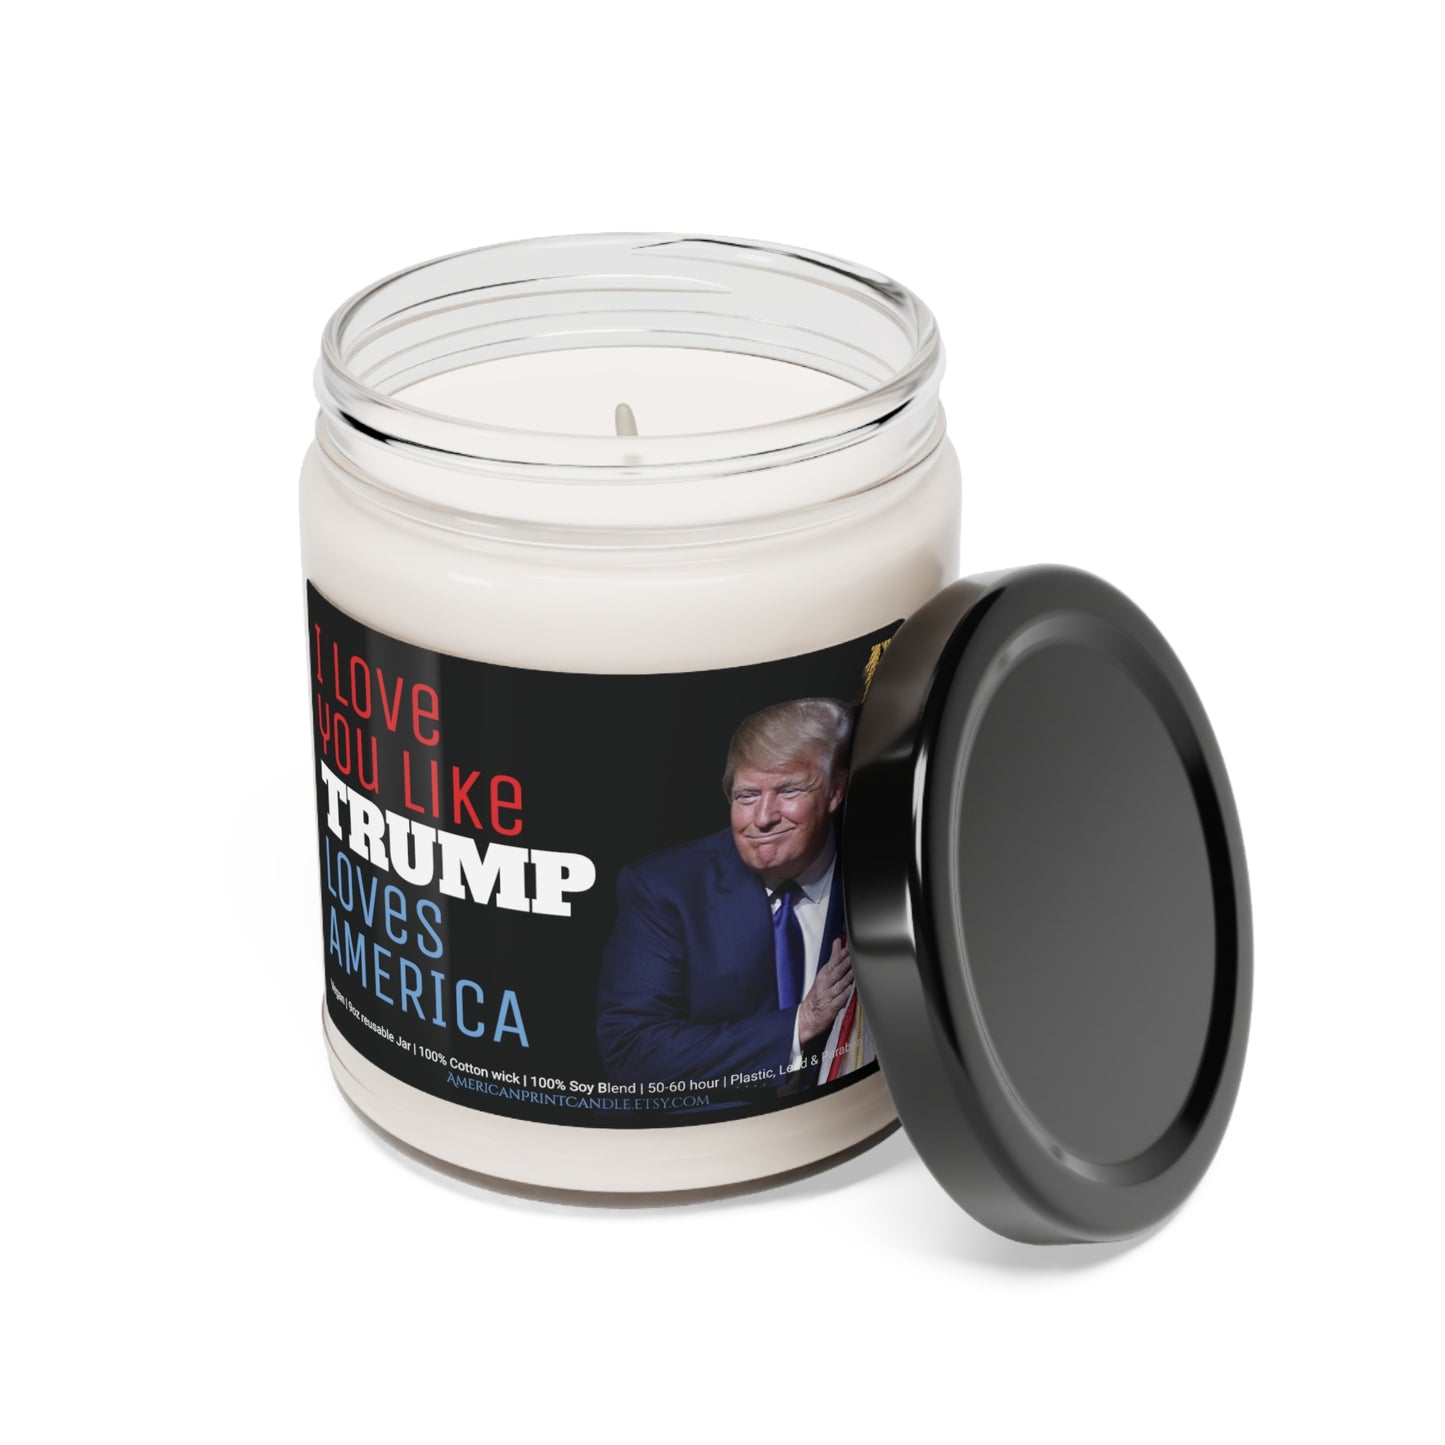 I love you like Trump loves American Flag Valentine's Day Gift Scented Soy Candle 9oz